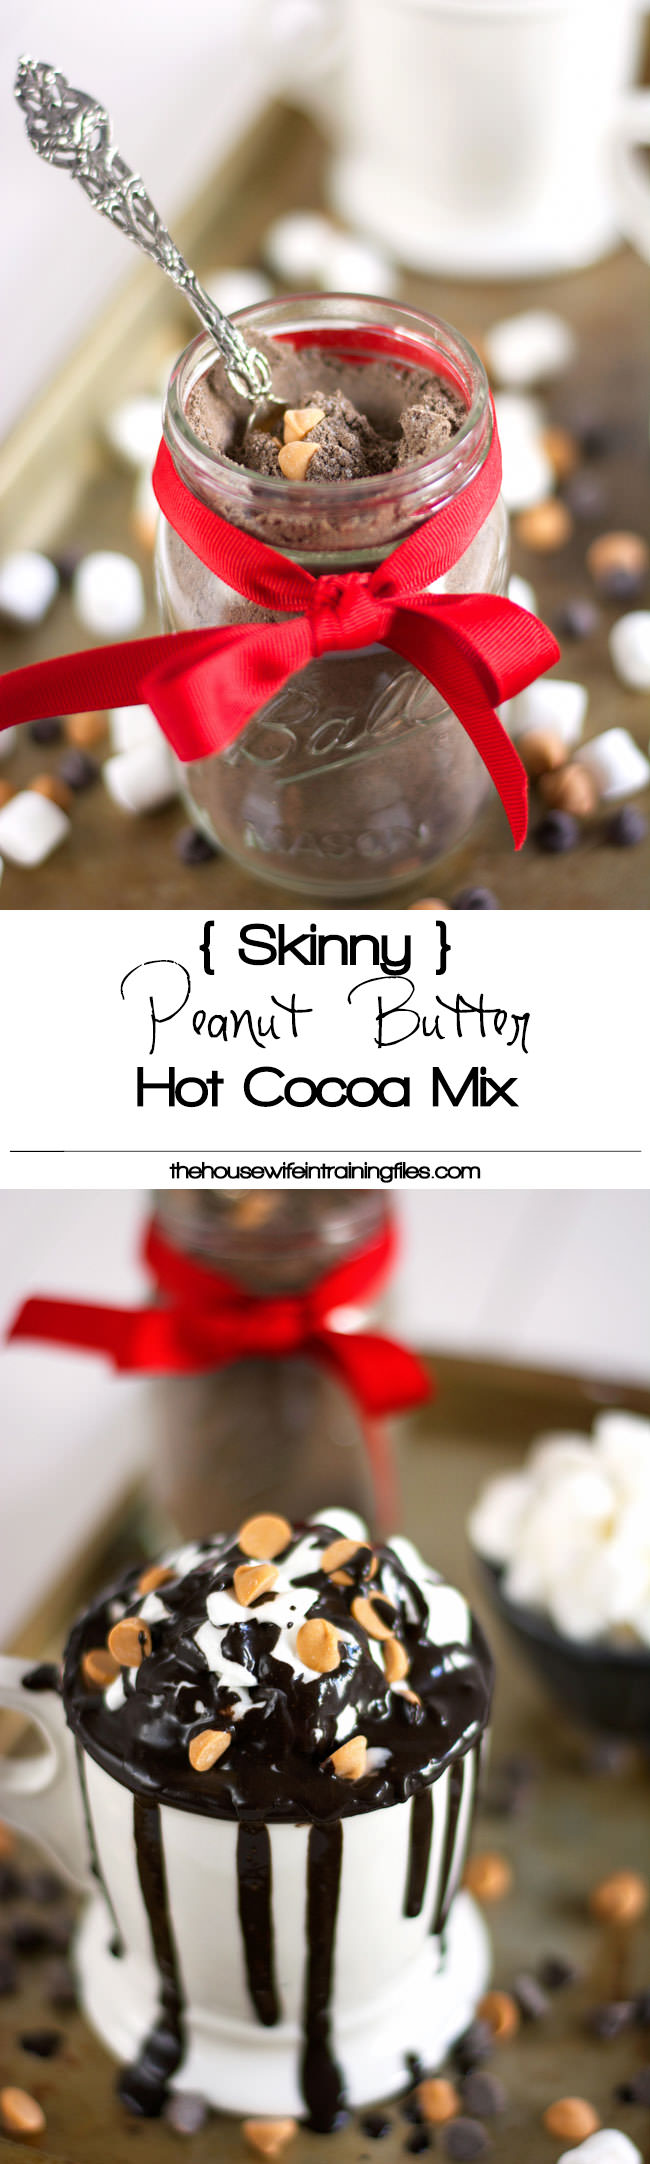 A healthy hot cocoa mix with a touch of peanut butter that tastes just like you are indulging in a peanut butter cup! 